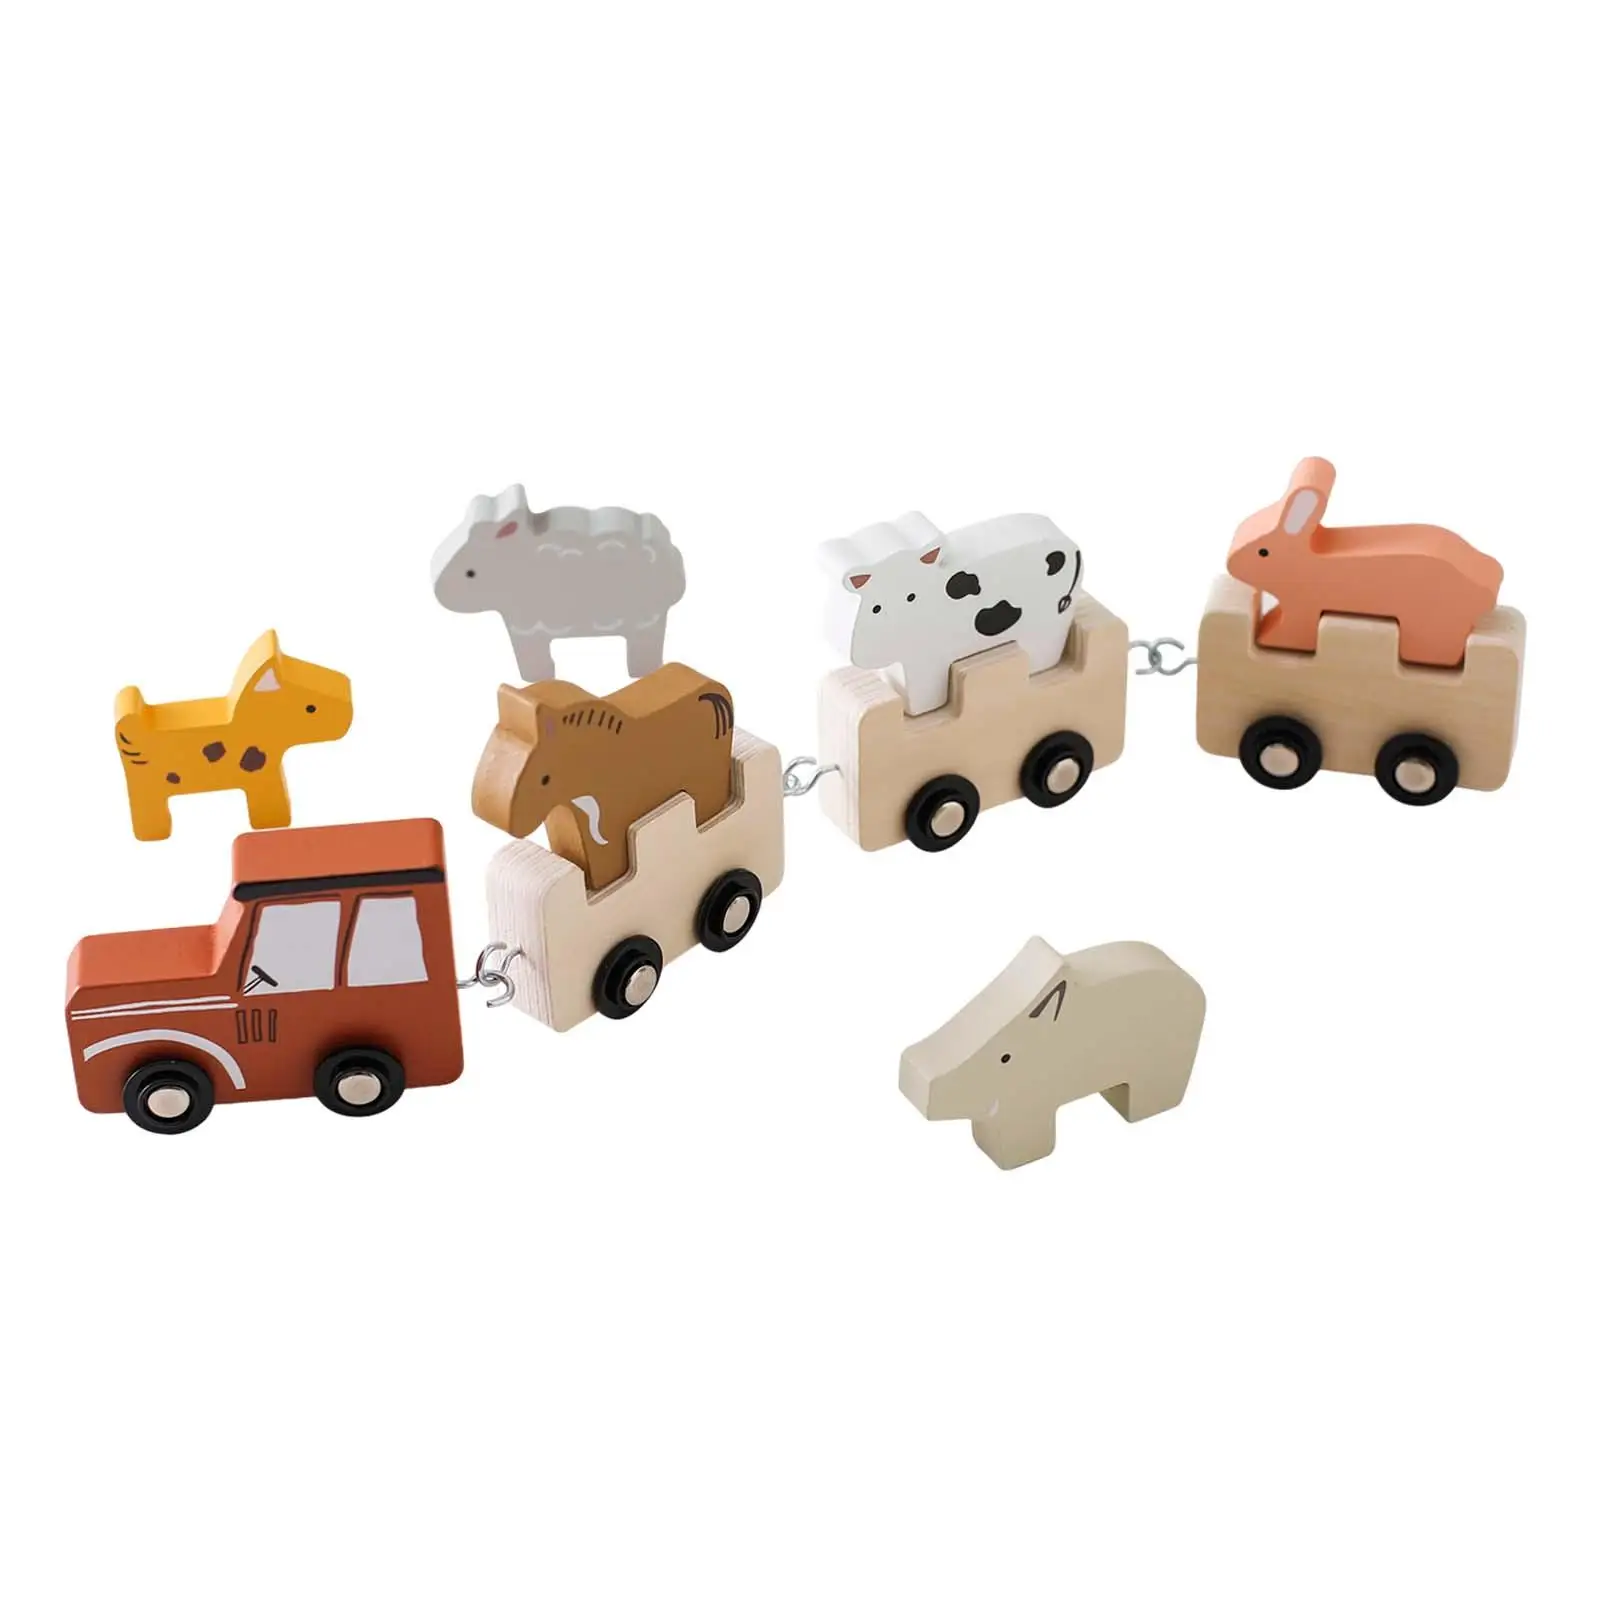 Animal Train Toy Sensory Learning Toy Preschool Learning Activities Animal Farm Train for Kids 2 3 Year Old Boy Girl Toys